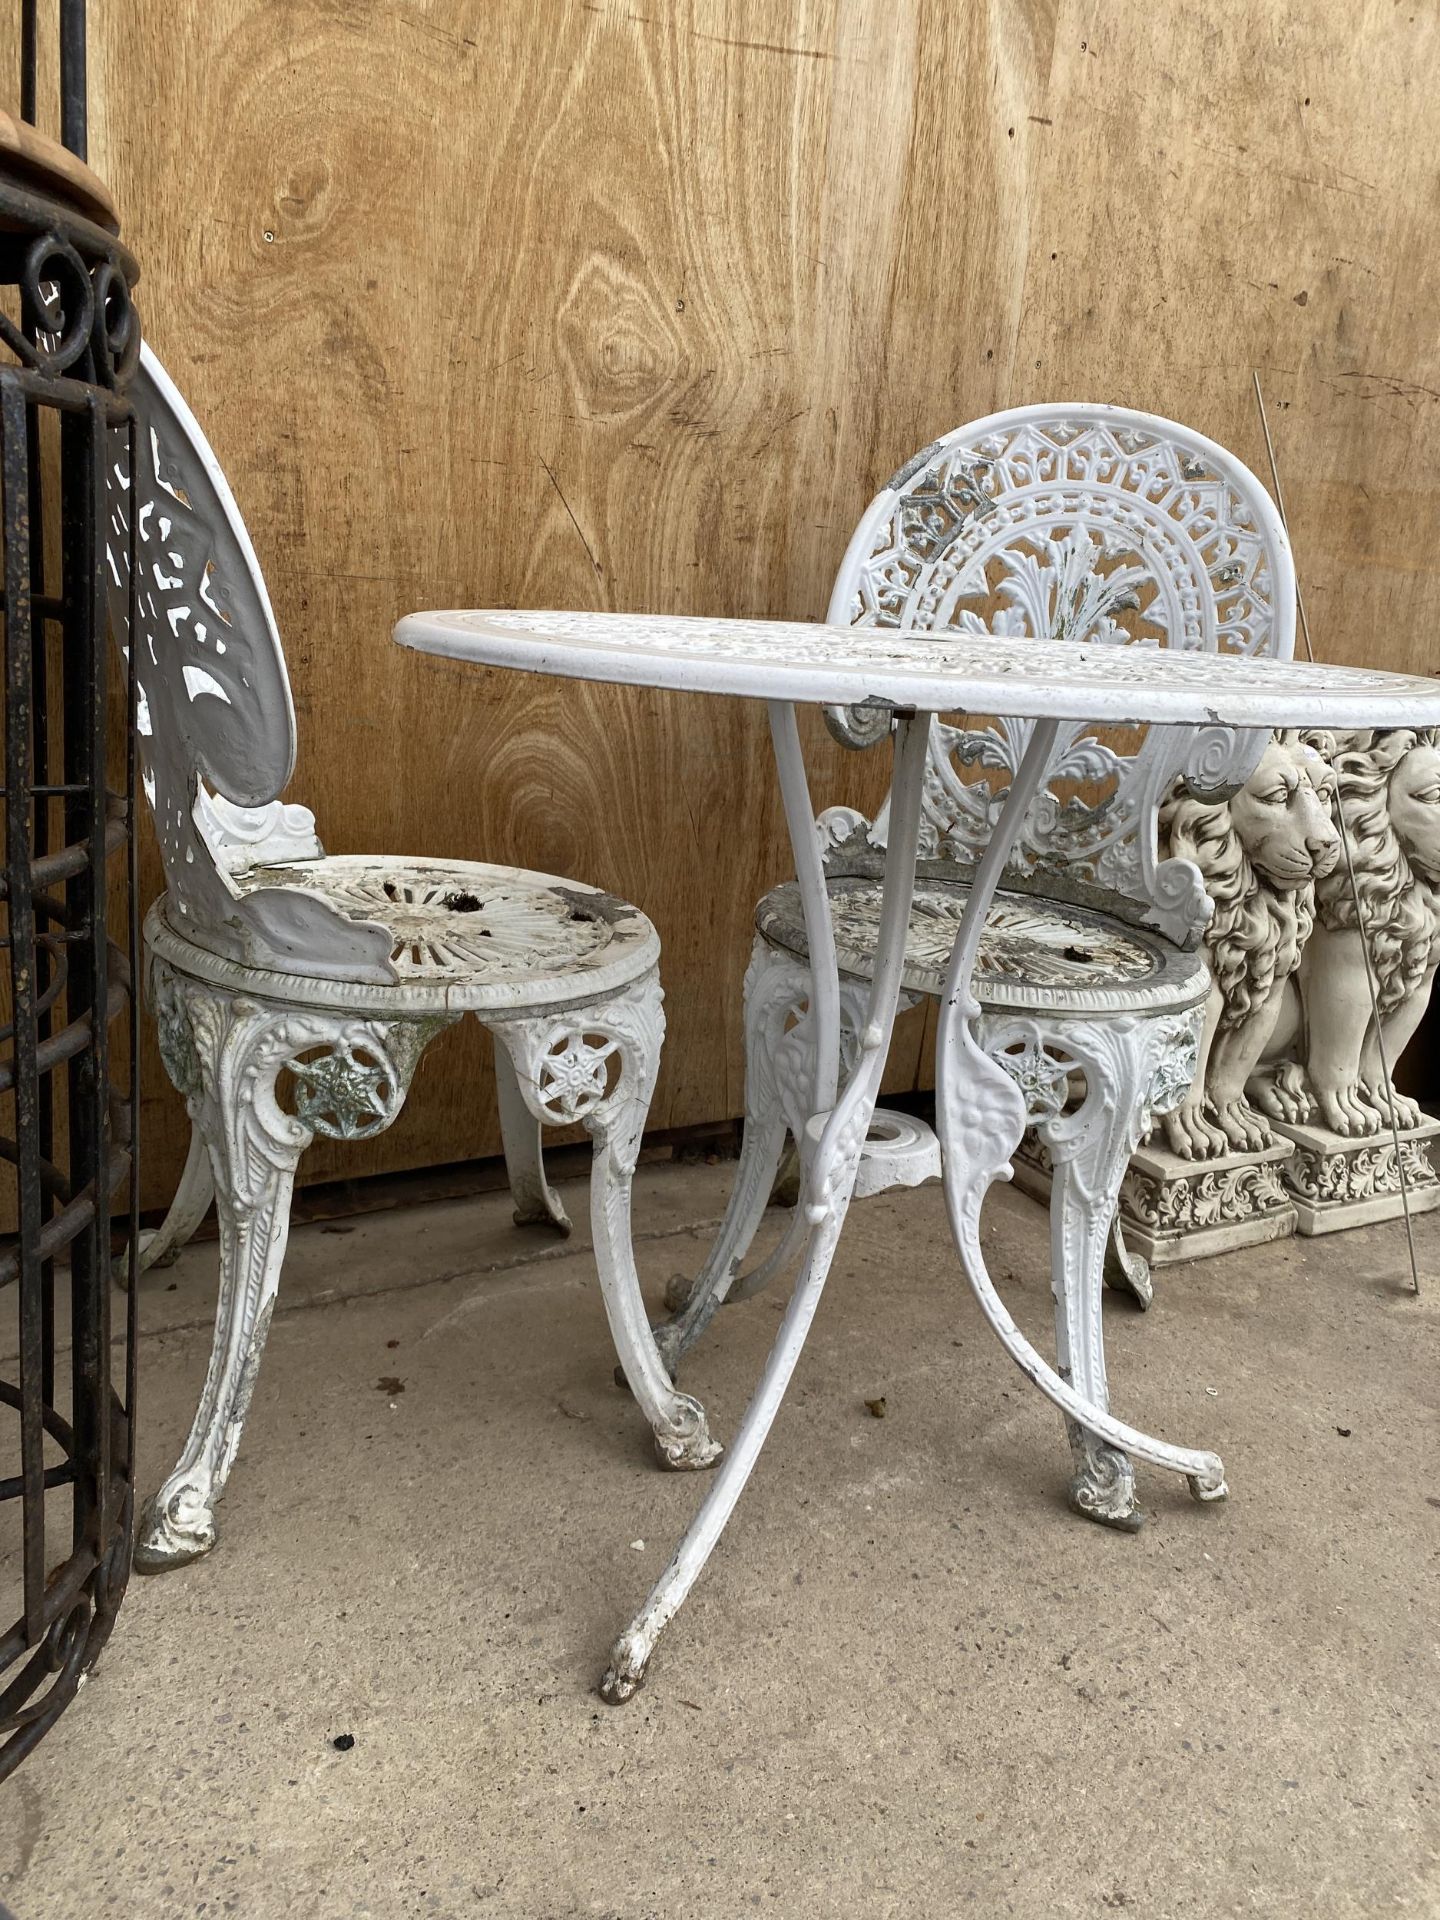 A VINTAGE CAST IRON METAL GARDEN BISTRO TABLE AND TWO CHAIRS - Image 2 of 2